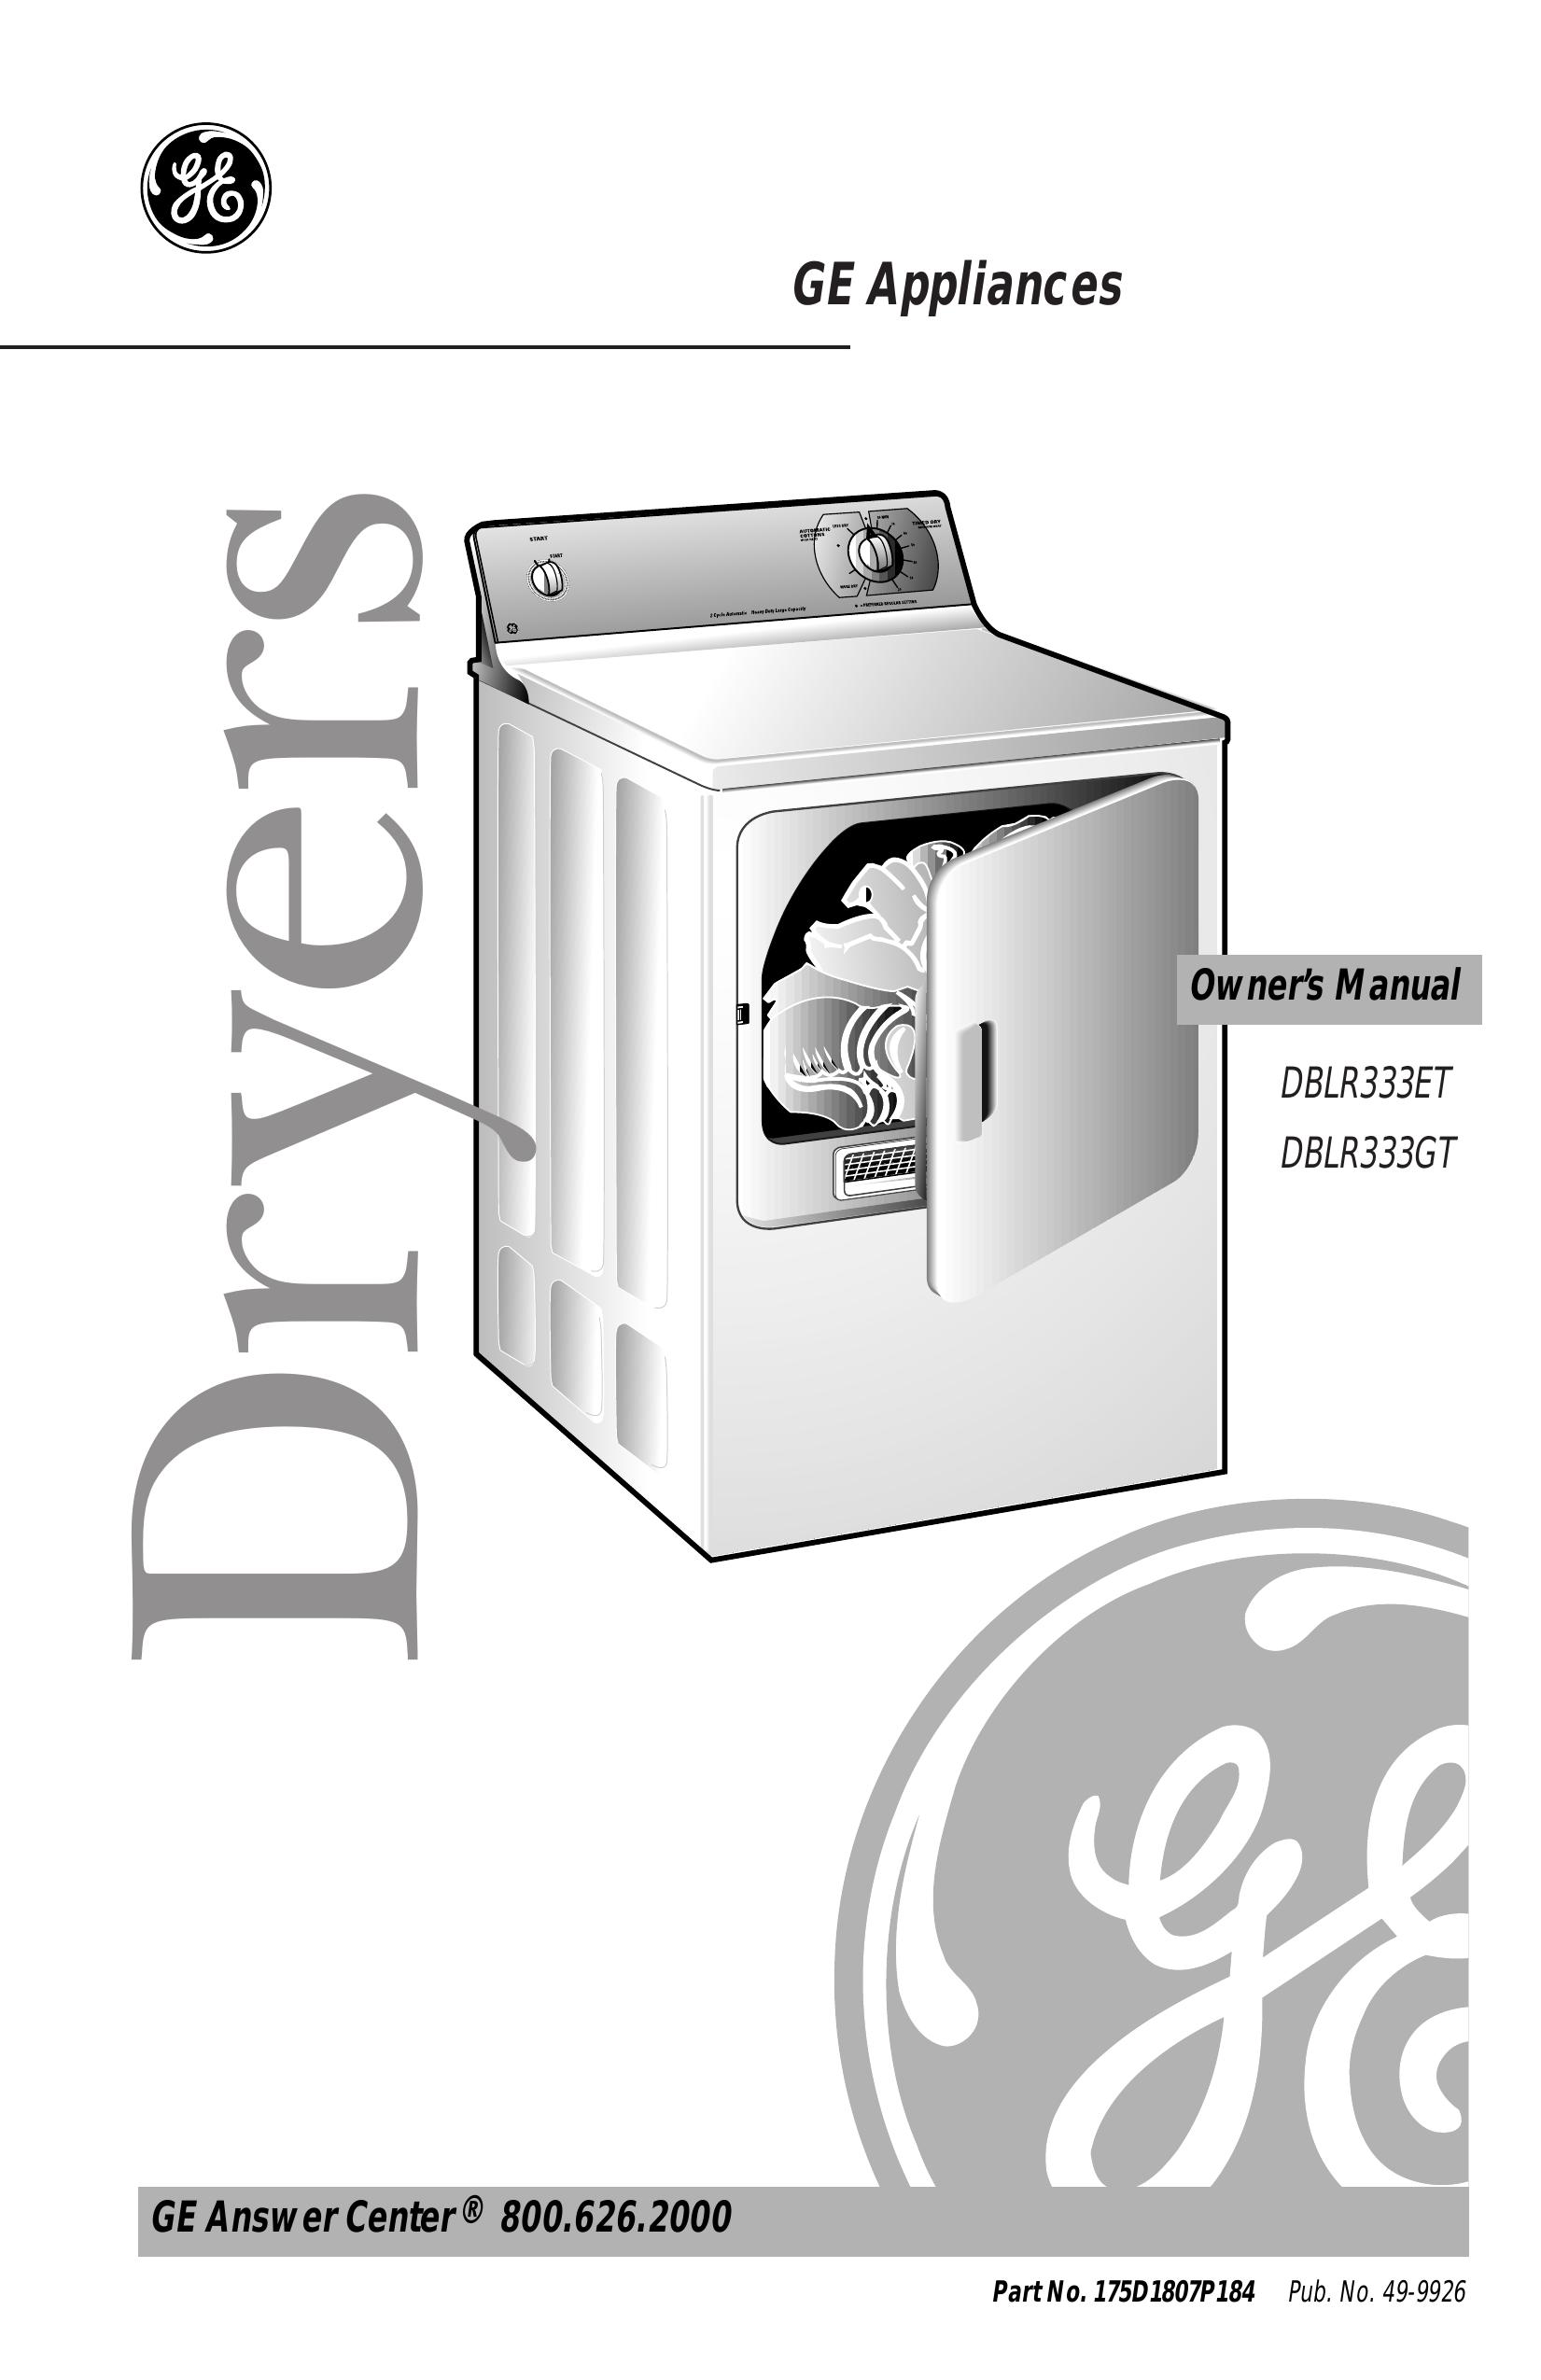 GE DBLR333GT Clothes Dryer User Manual